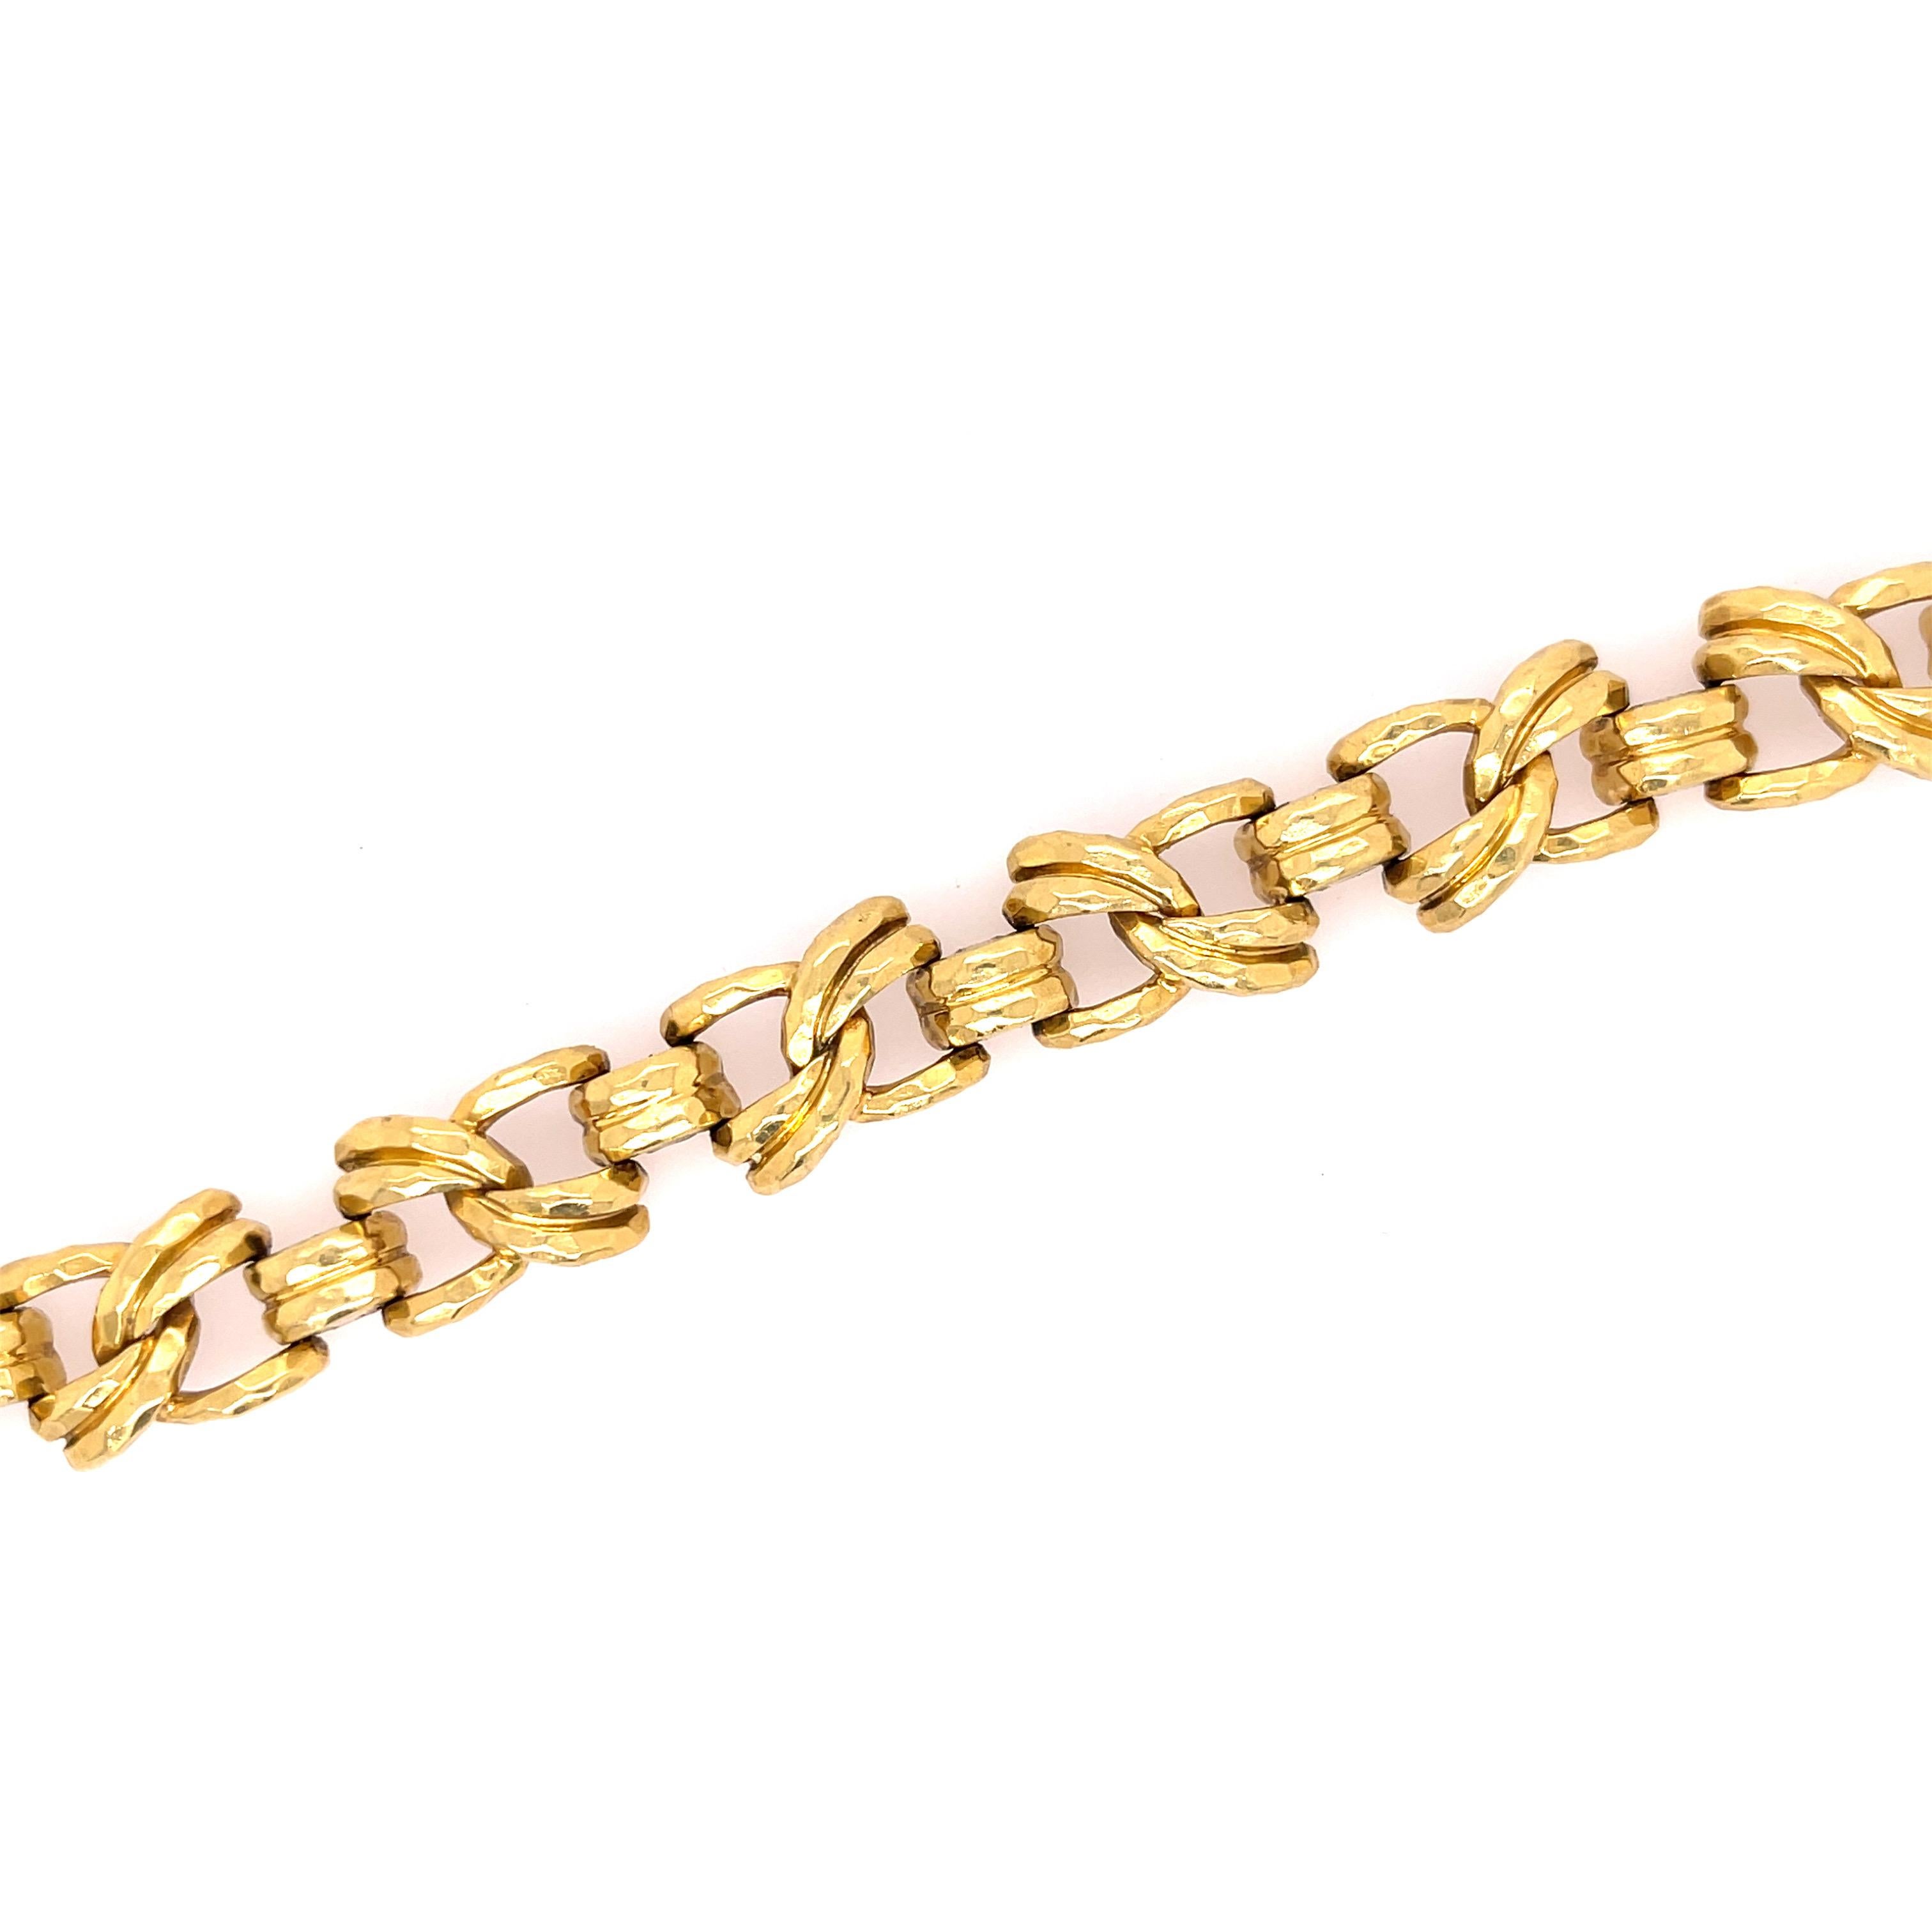 Henry Dunay Faceted Link Bracelet in 18K Yellow Gold. The bracelet is 7.5 inches in length and 11.30mm in width. 